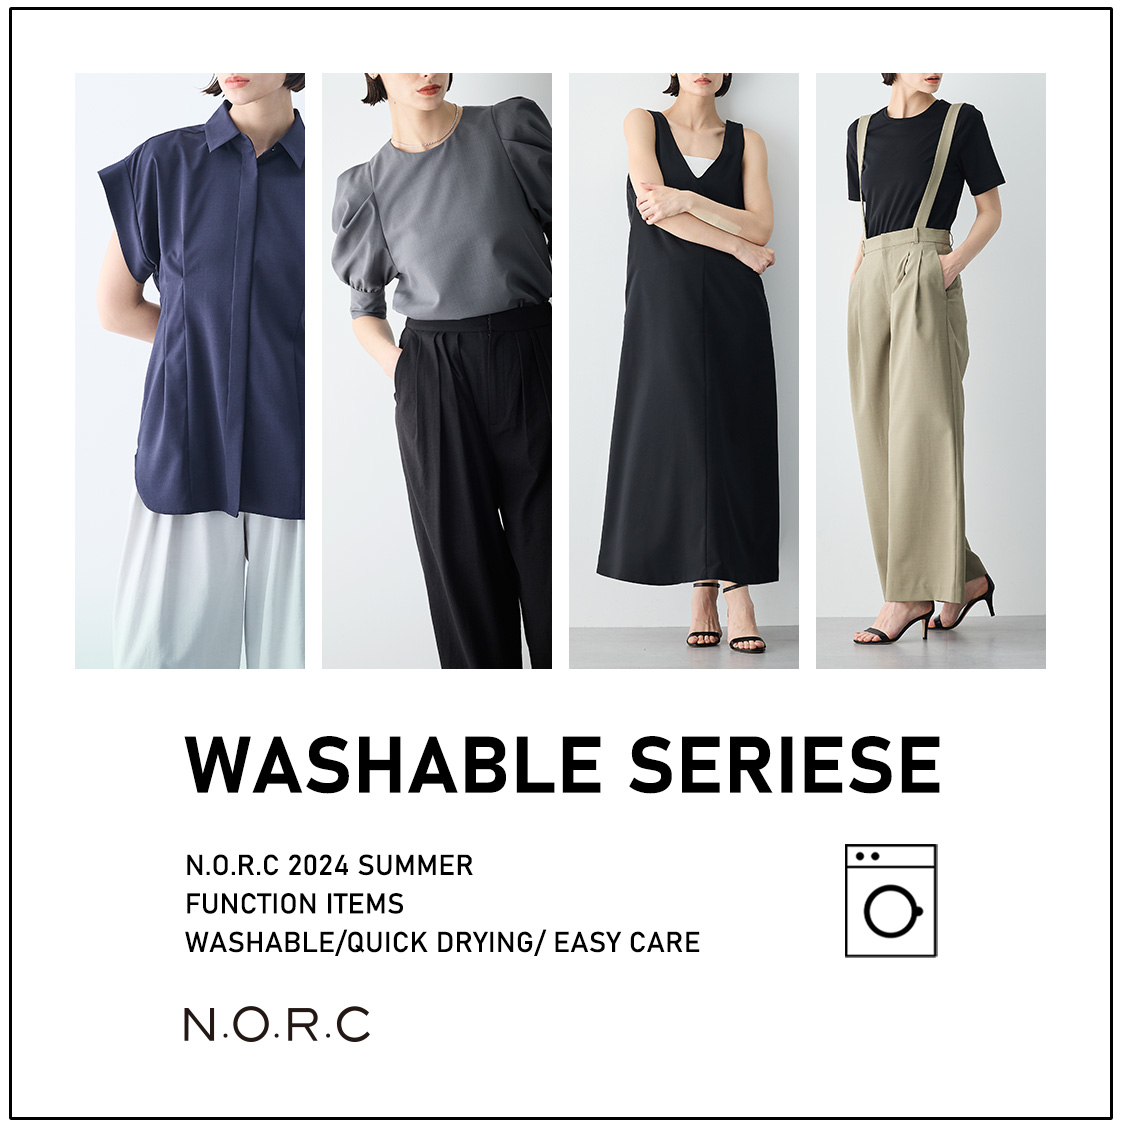 WASHABLE SERIESE